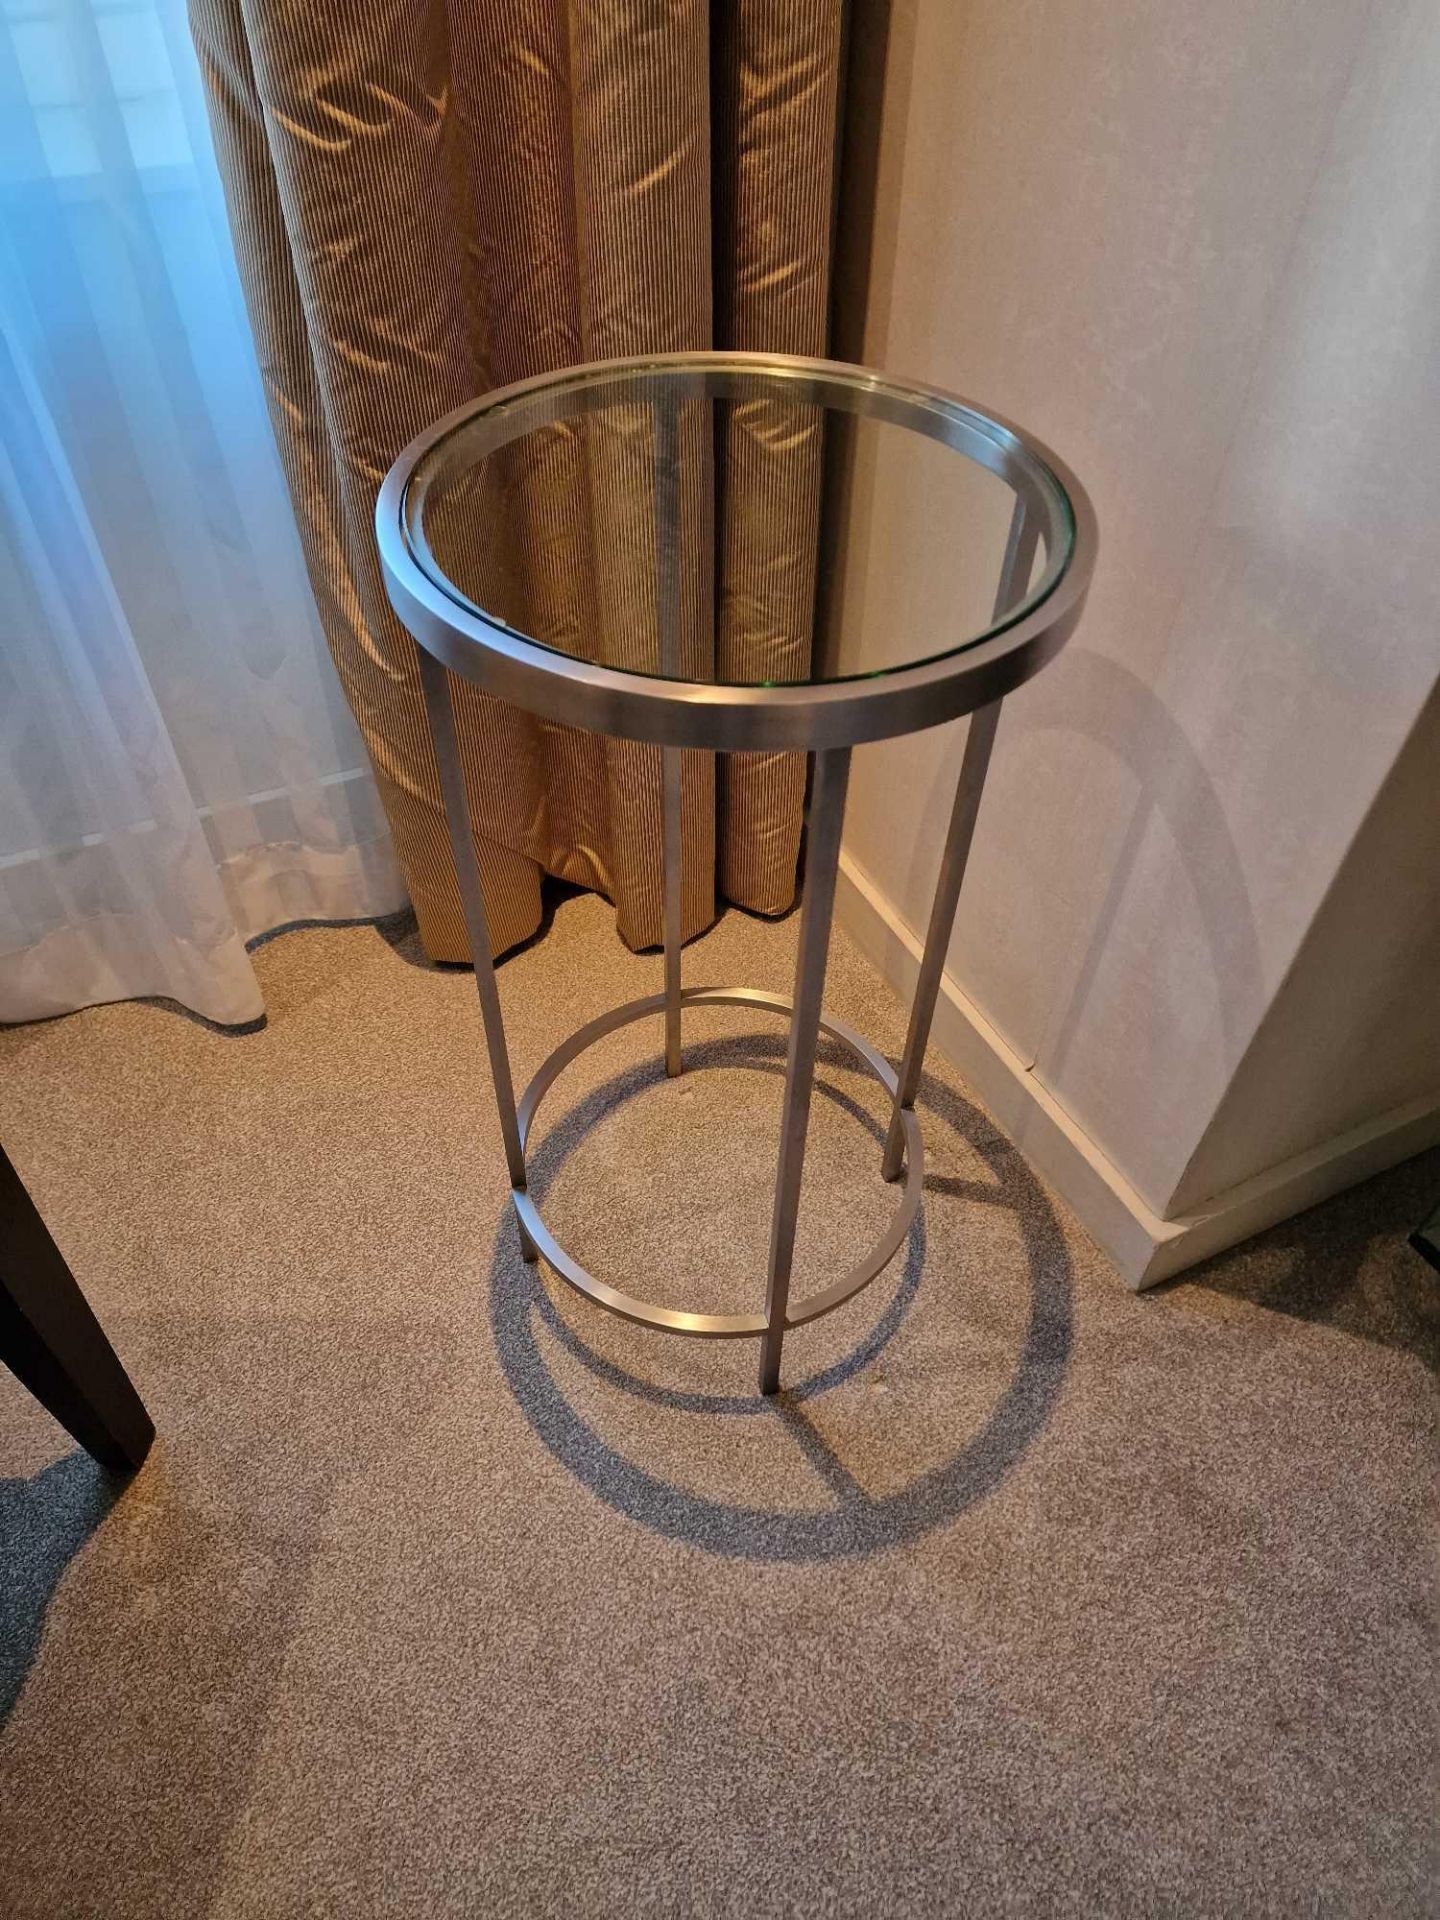 A Modern Design Stainless Steel And Tempered Glass Side Table 35cm Diameter x 64cm Tall - Image 3 of 3